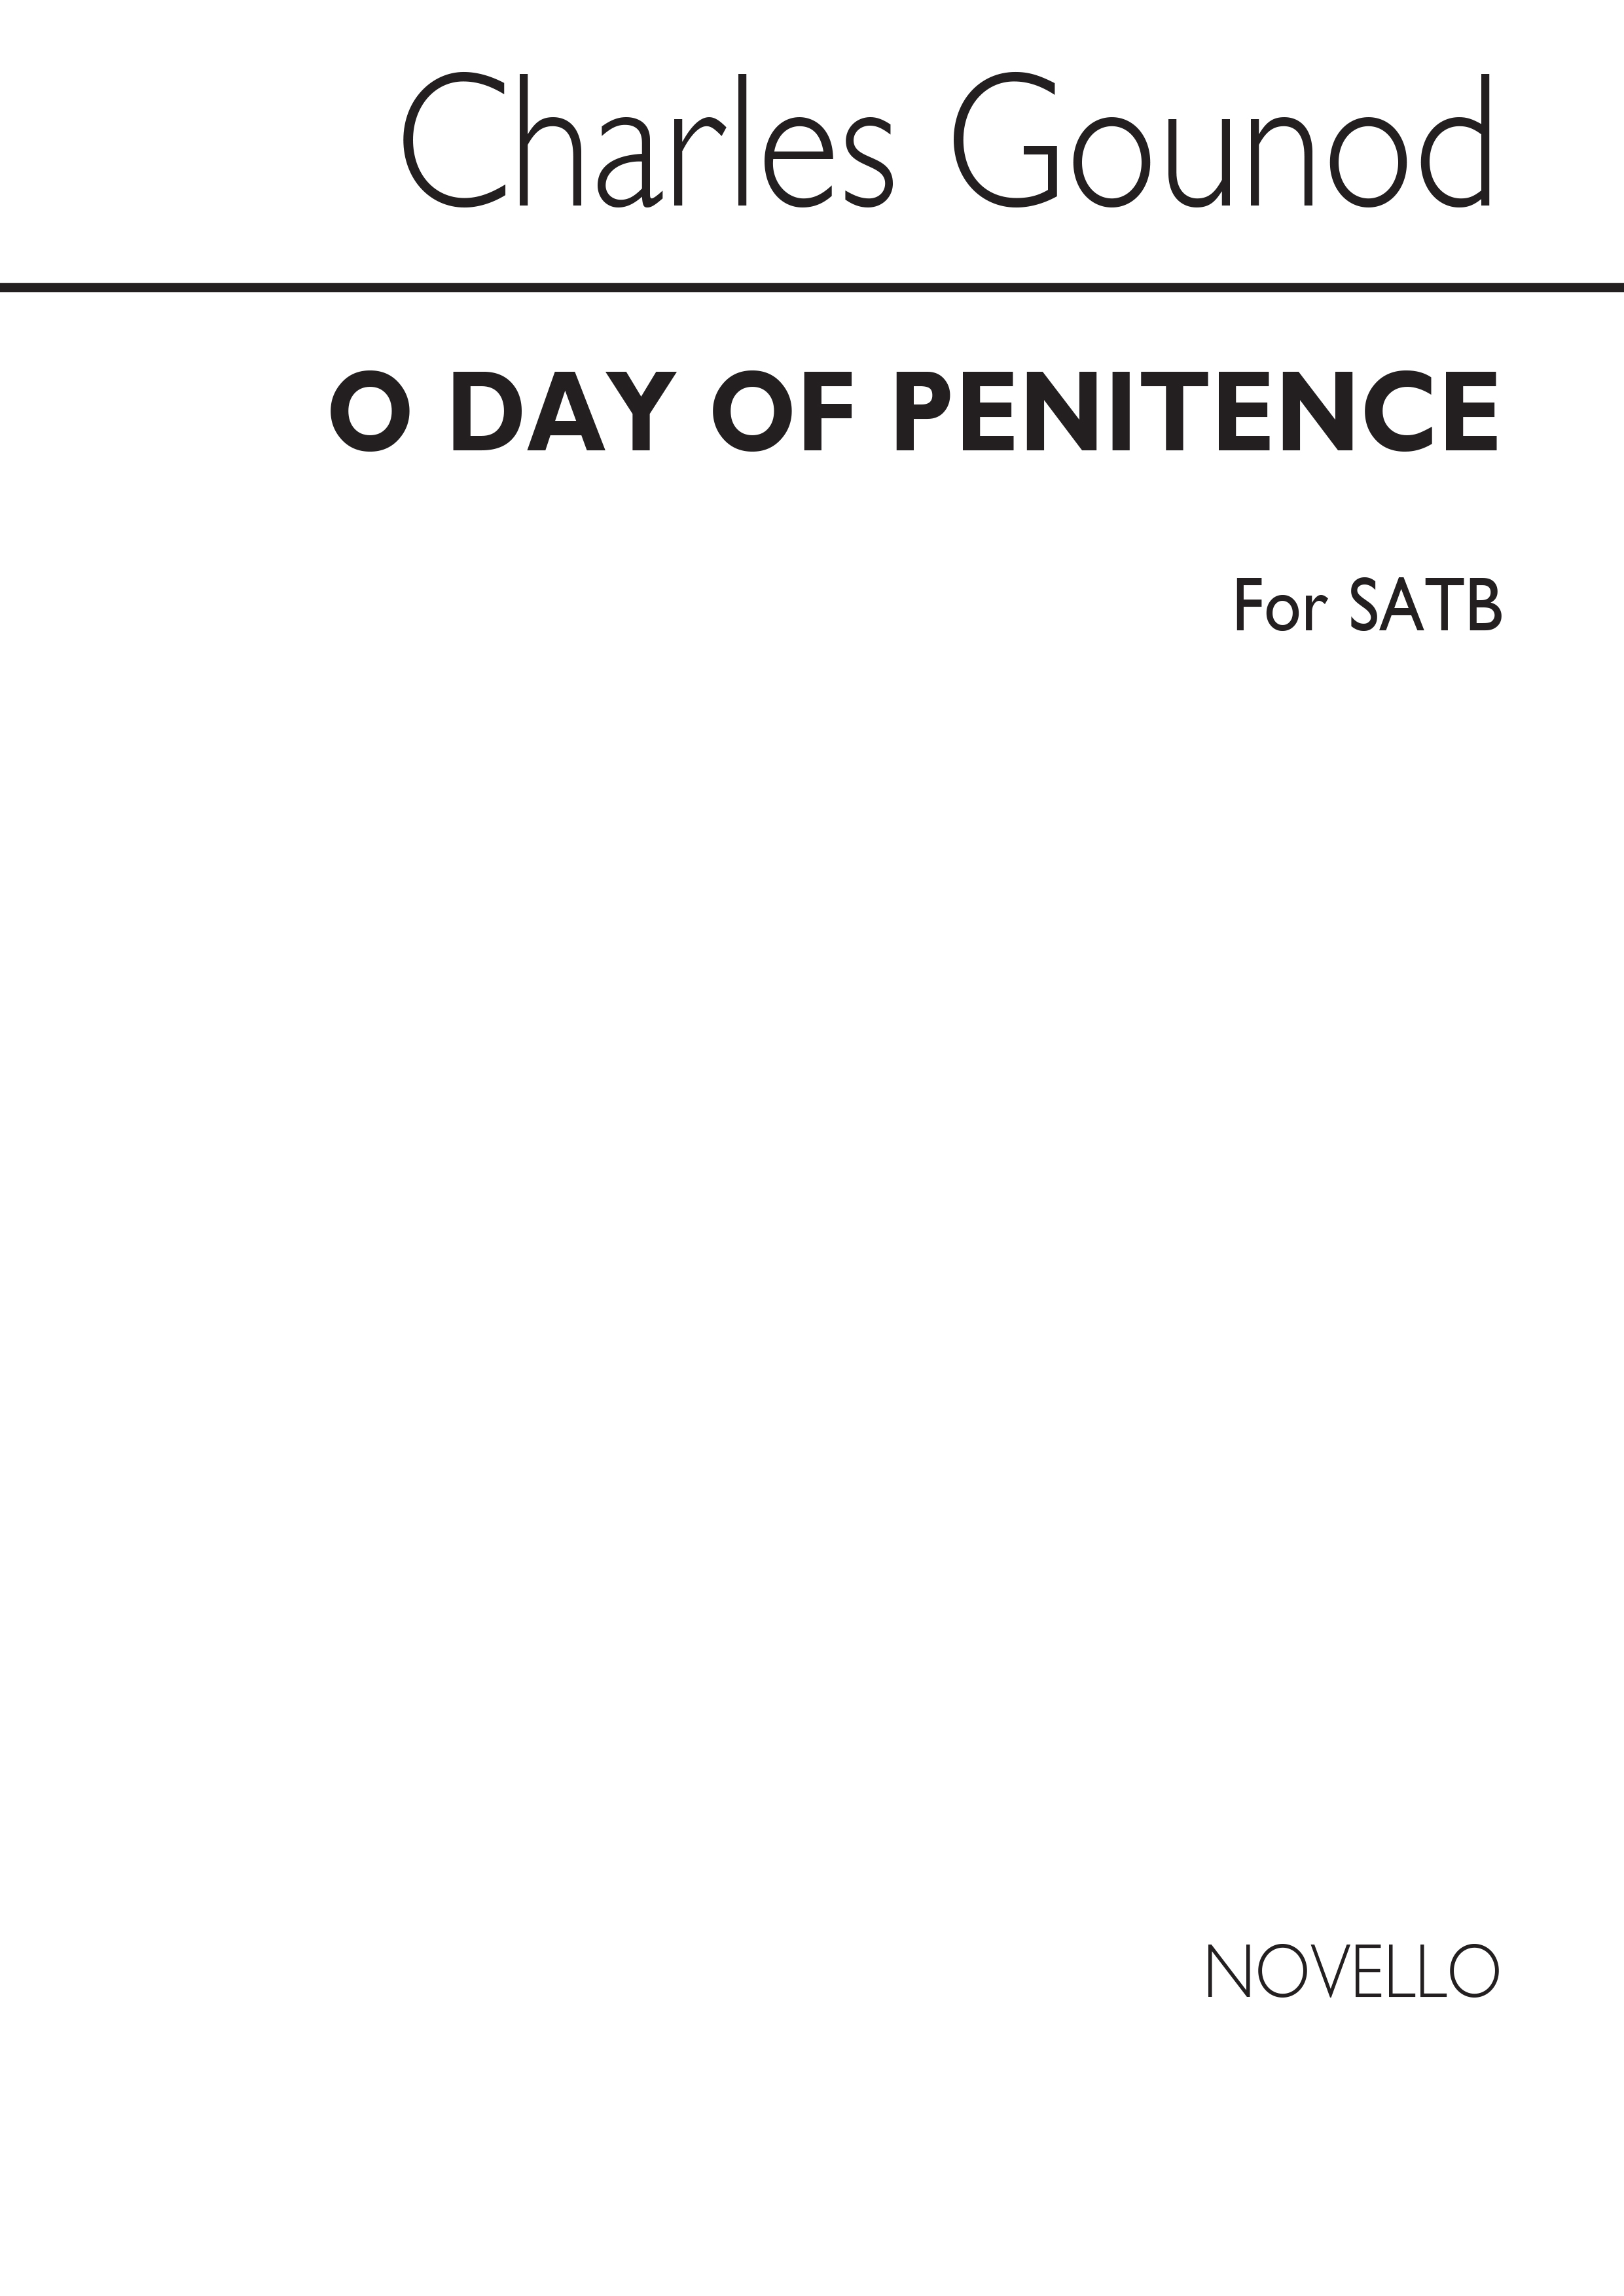 Gounod, C O Day Of Penitence Satb